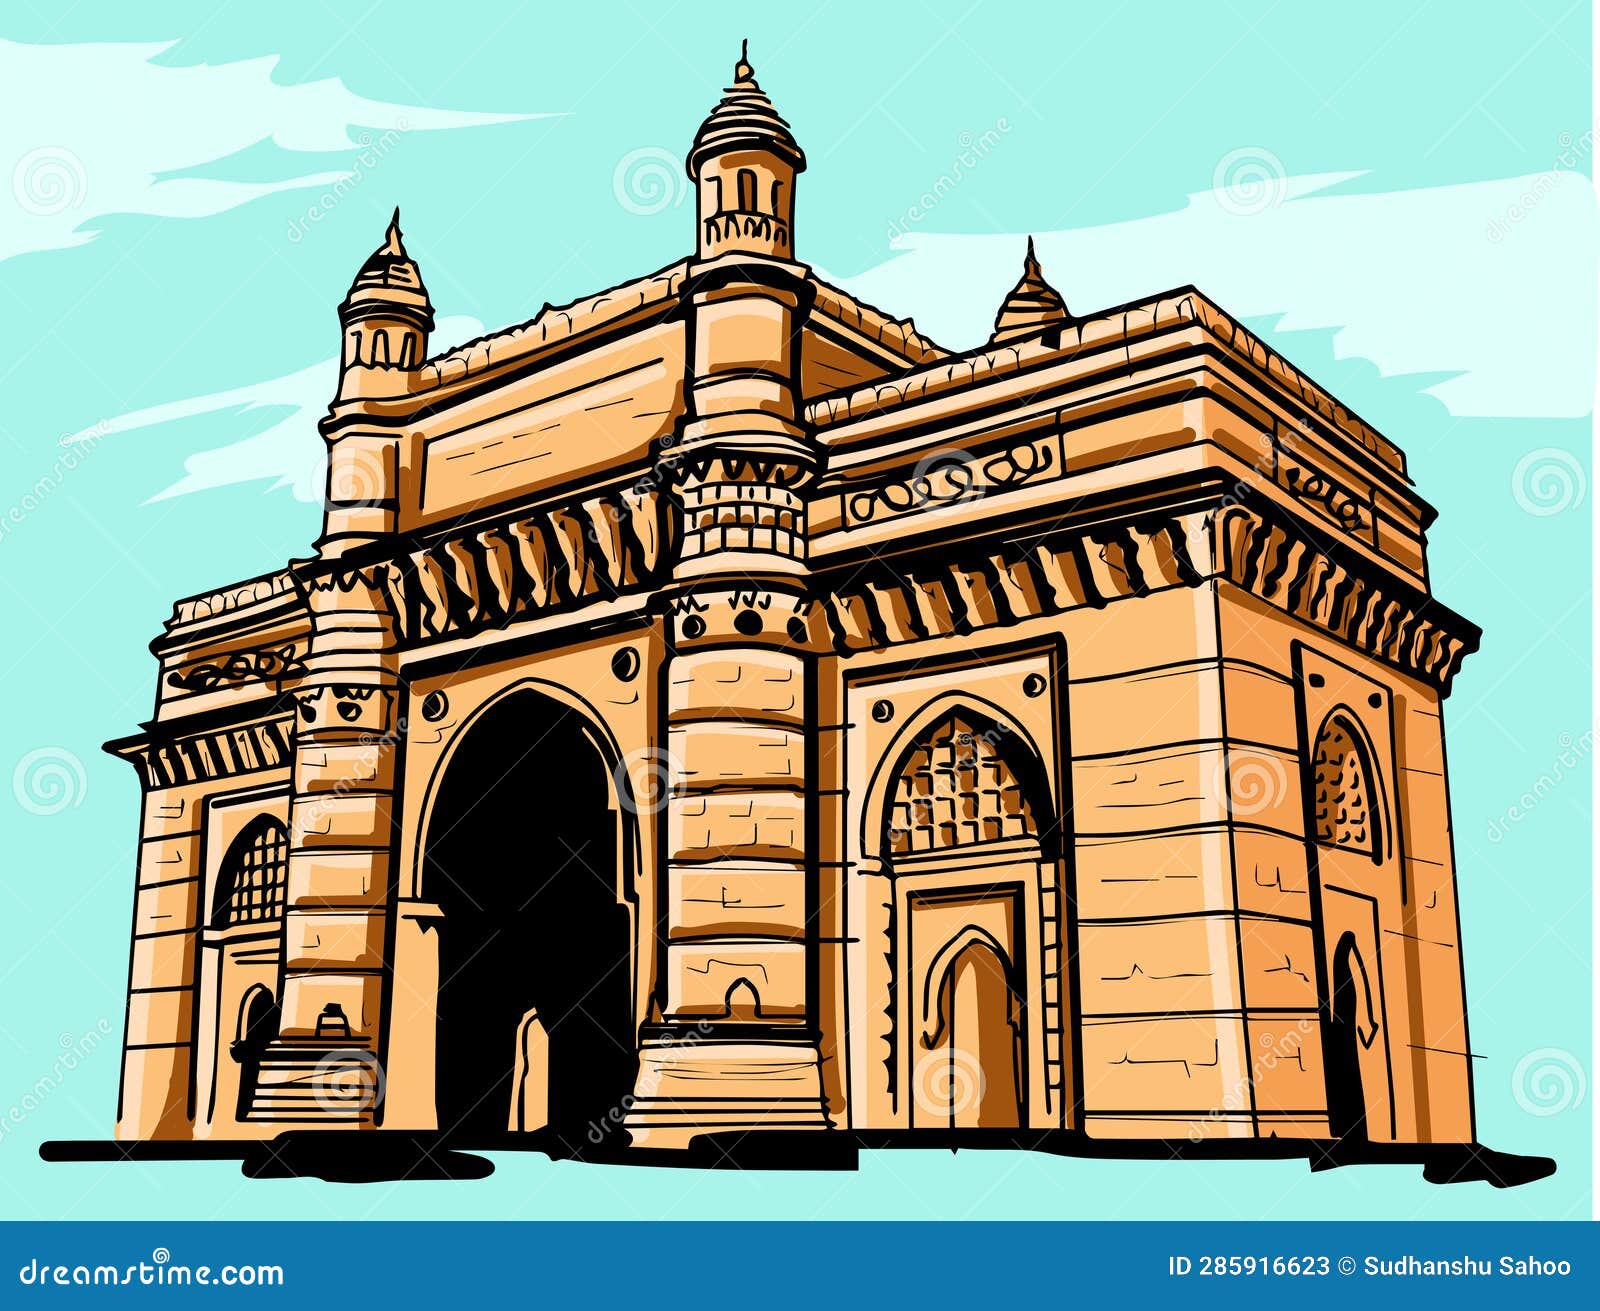 Share more than 156 gateway of india sketch latest